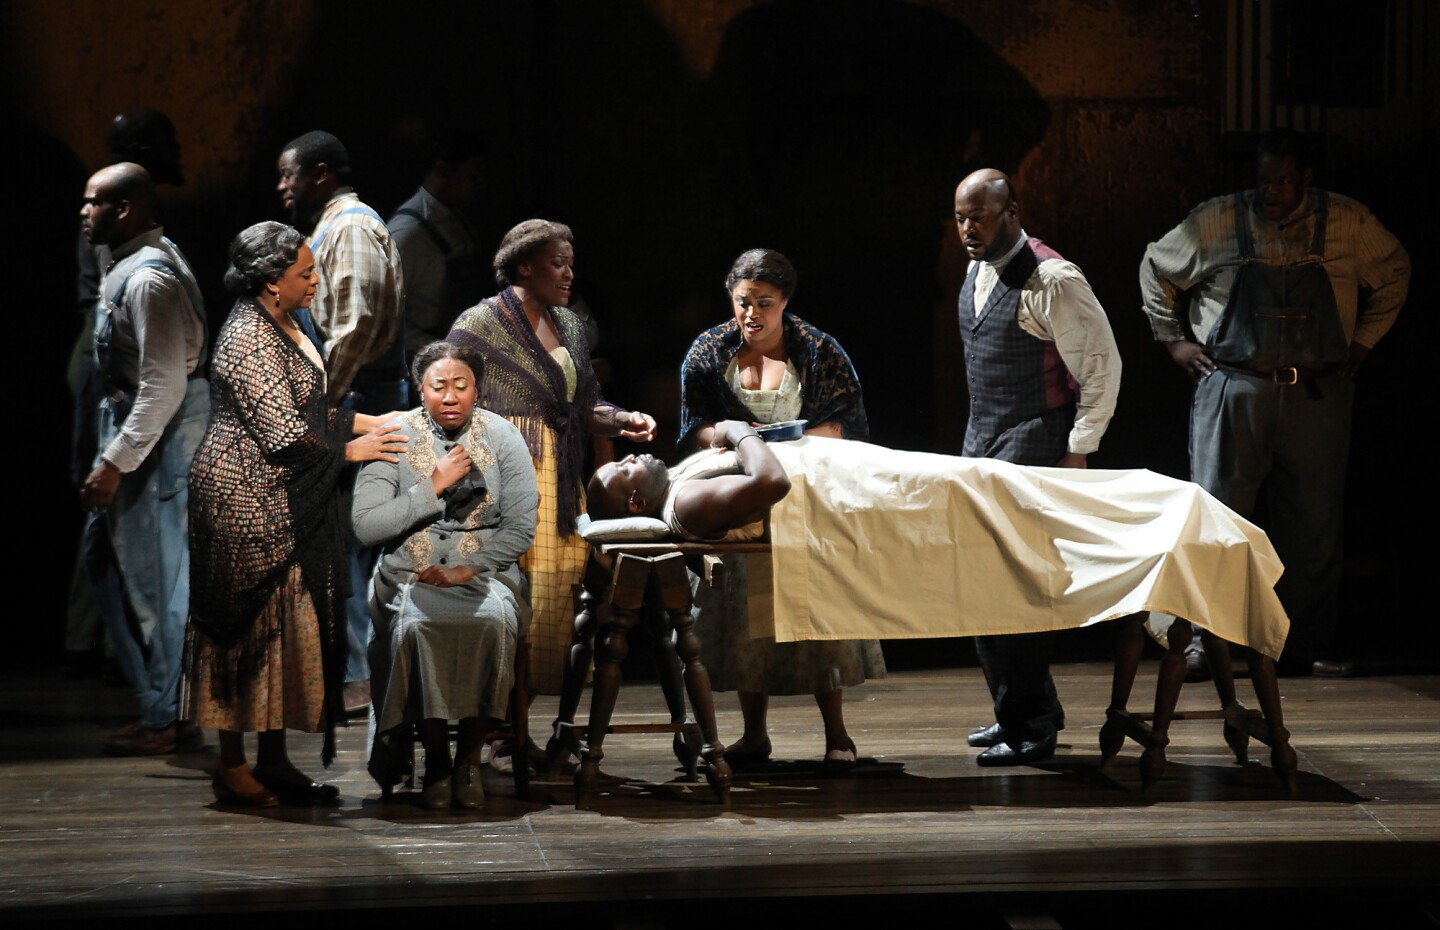 Cast of the Broadway musical "The Gershwins' Porgy and Bess" on stage at the Ahmanson Theatre April 22, 2014, in Los Angeles.